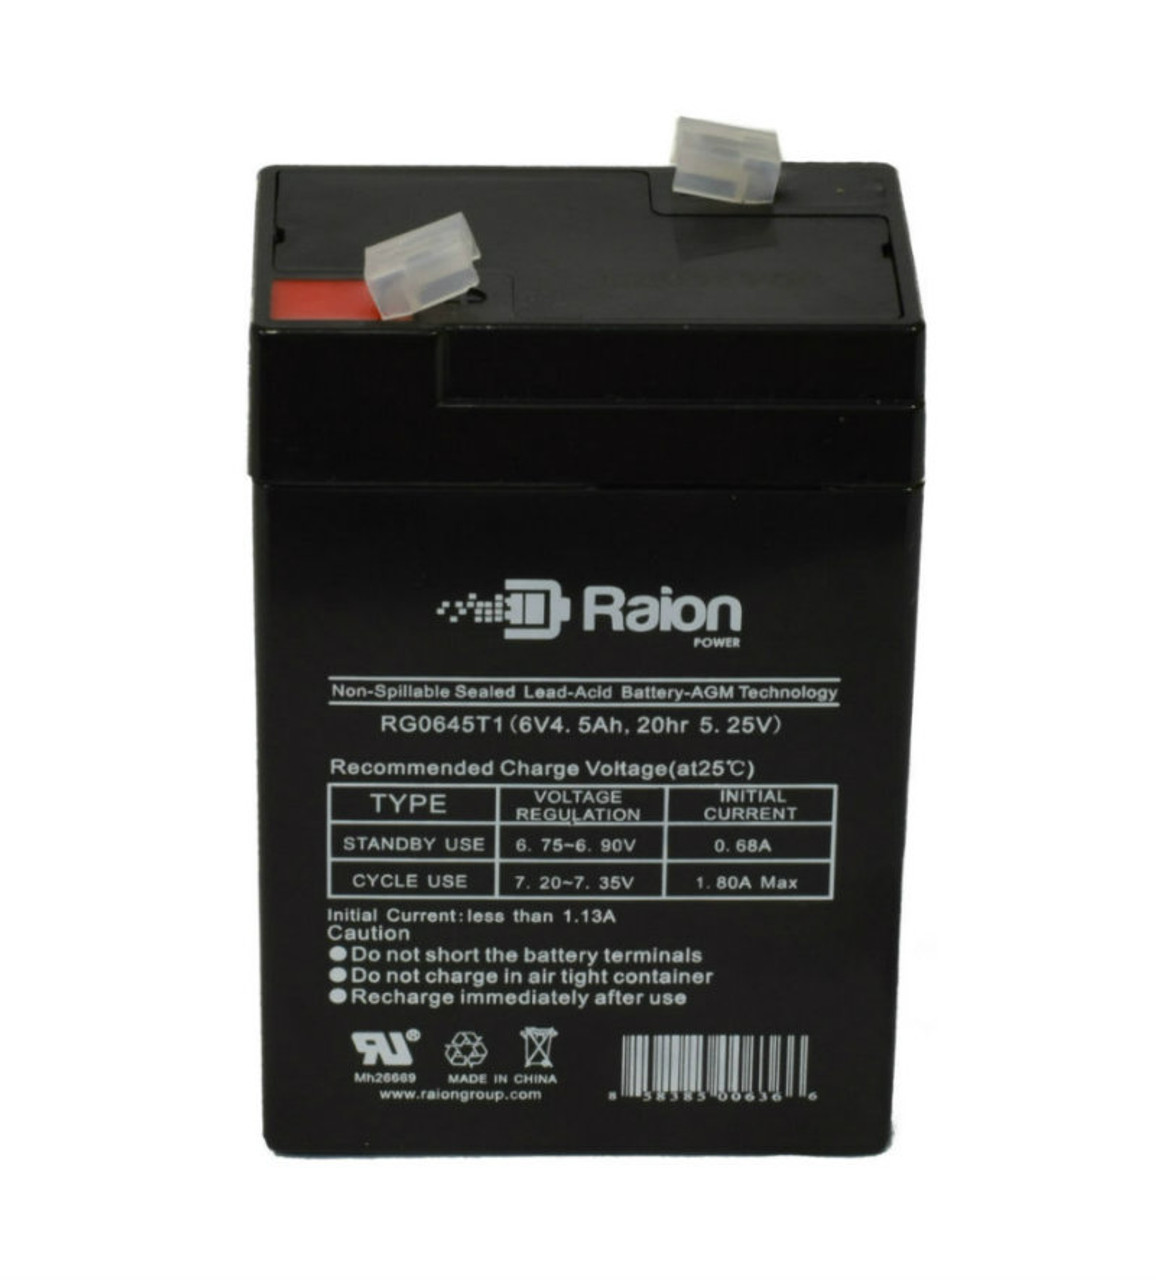 Raion Power RG0645T1 Replacement Battery Cartridge for Carpenter Watchman CLA106